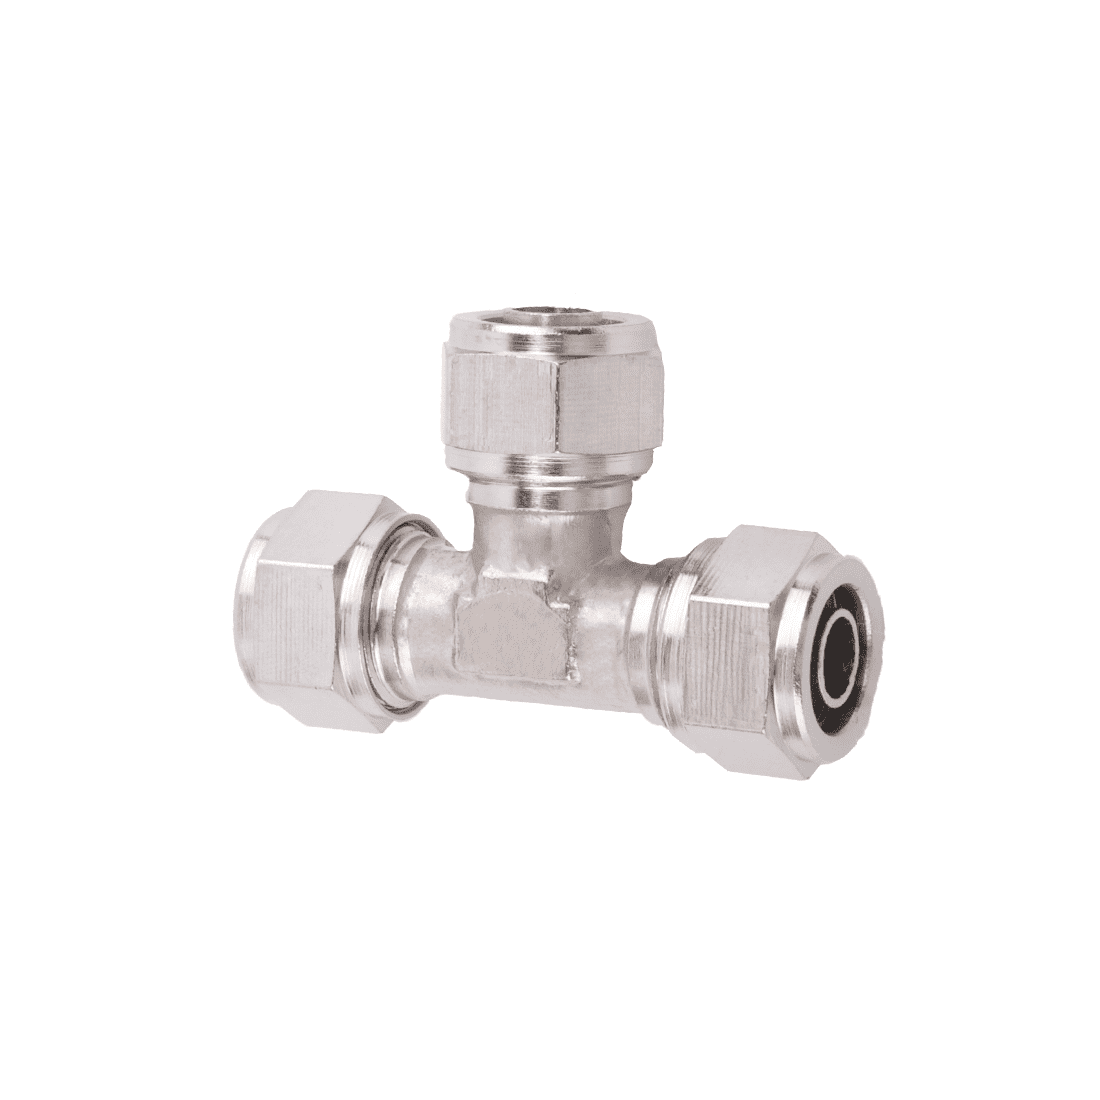 China Wholesale Quick Connect Fitting Factories - SNS KLE Series pipe fitting pneumatic brass quick coupling three way fitting – SNS